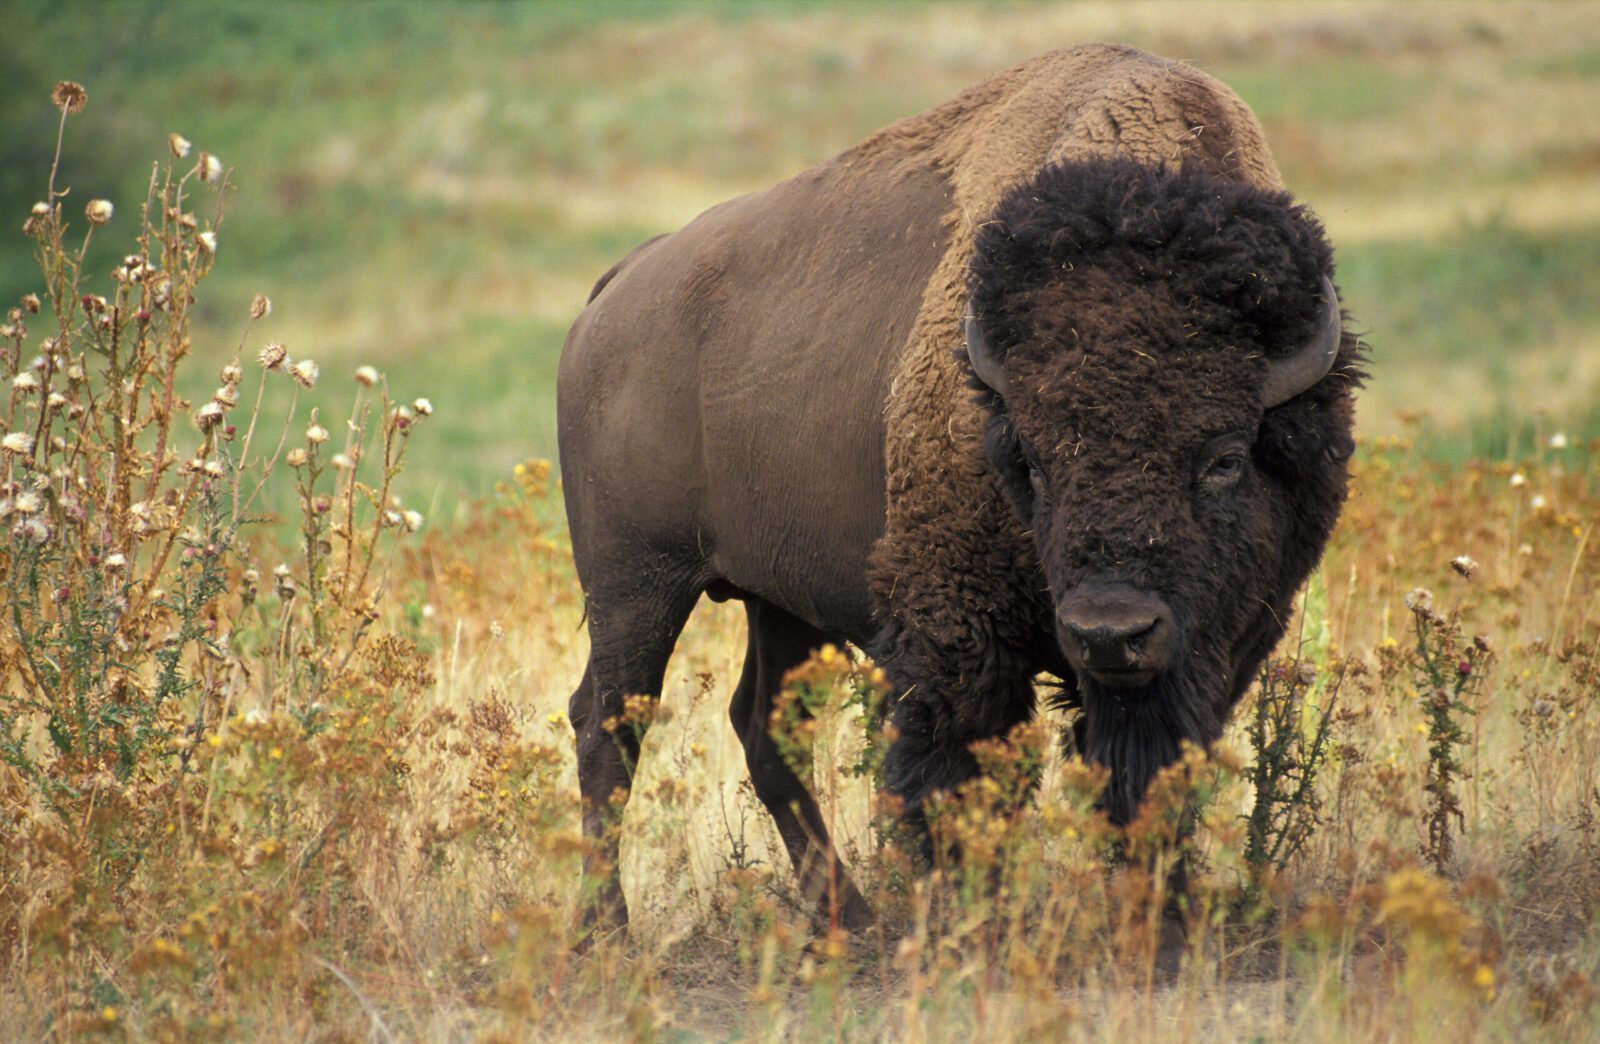 Bison vs. Buffalo: What’s the Difference?